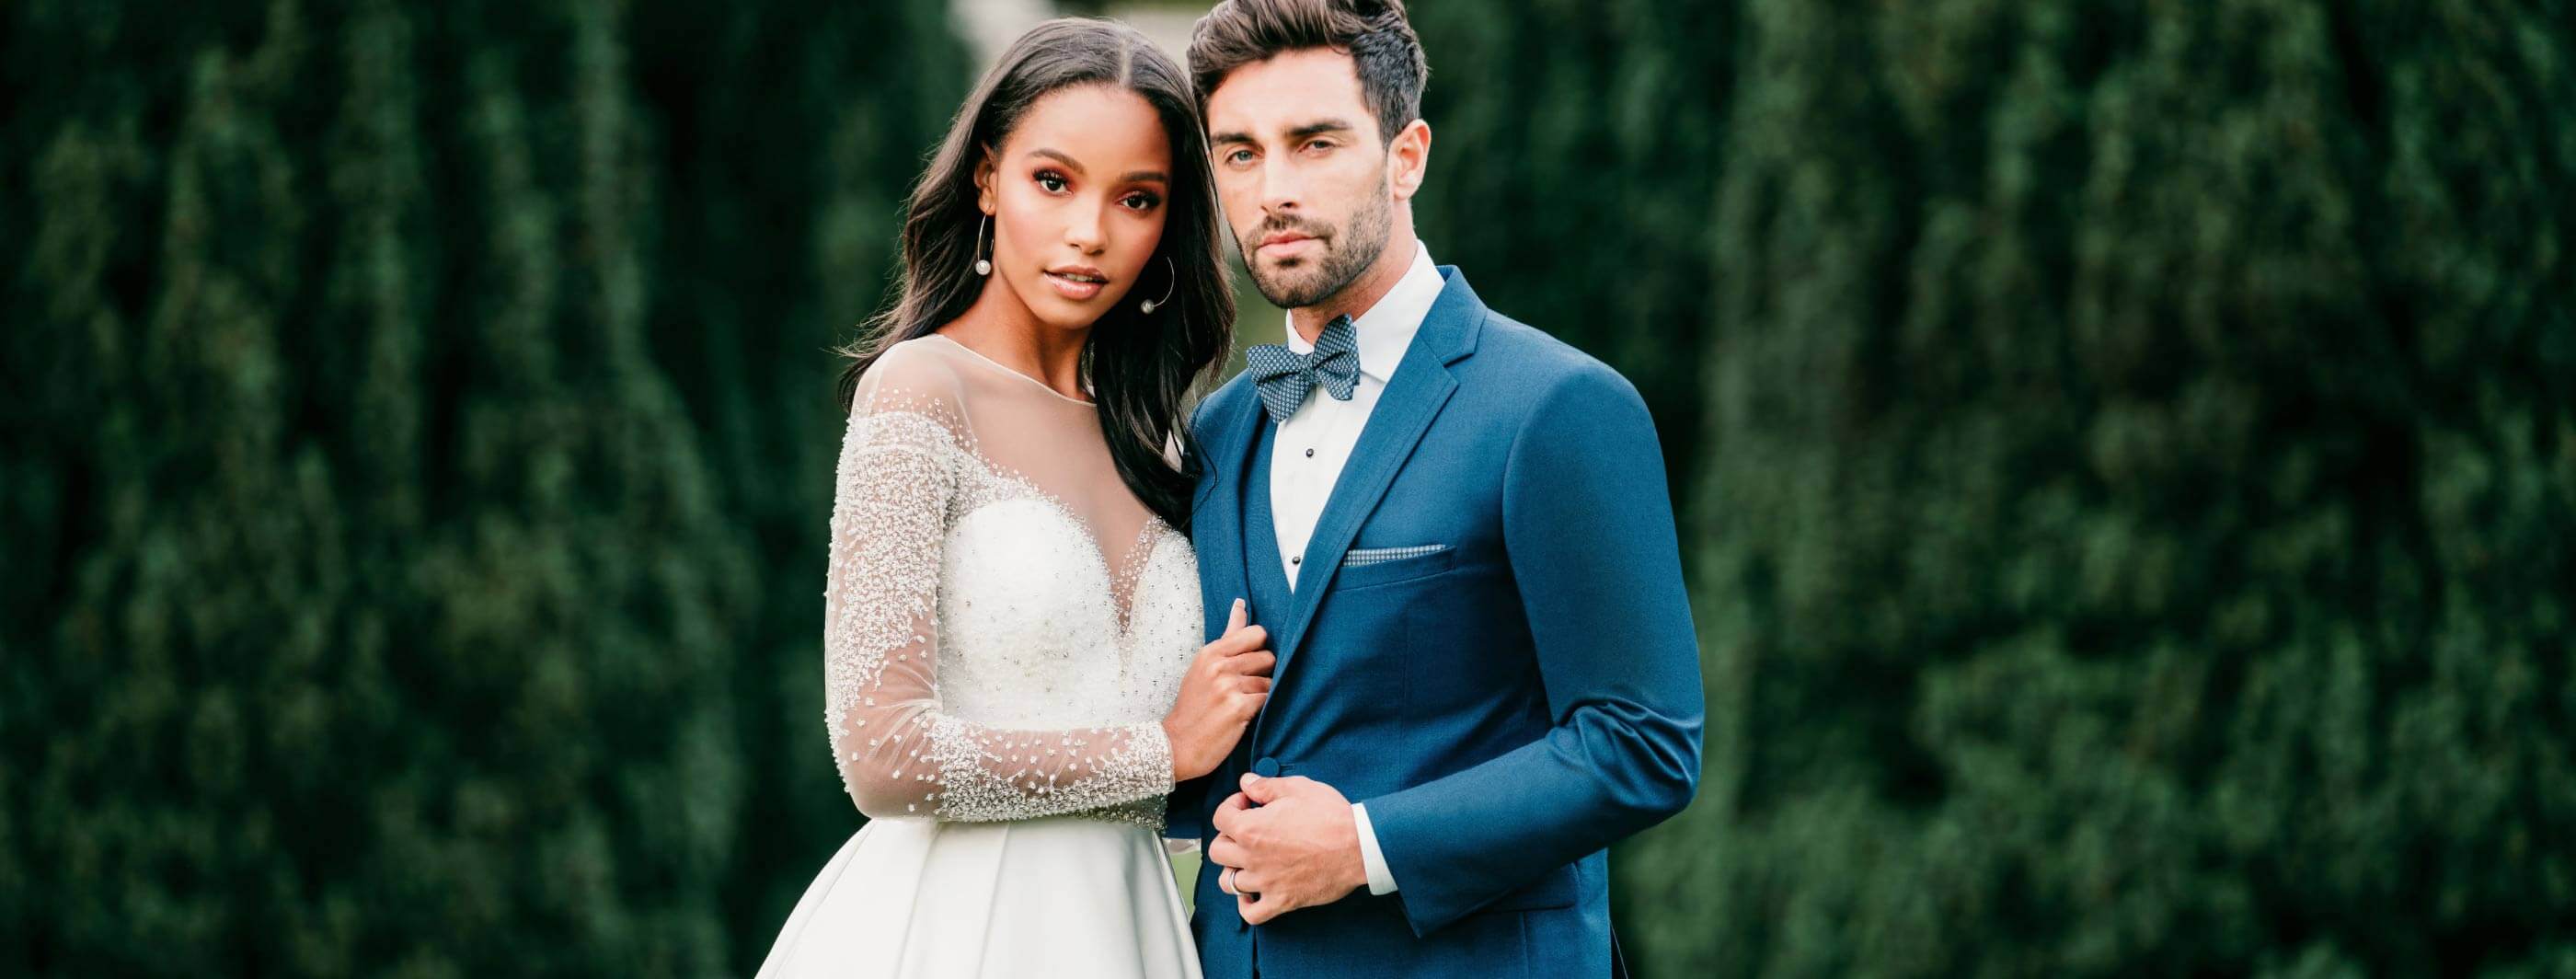 Сouple wearing a white gown and a dark blue suit